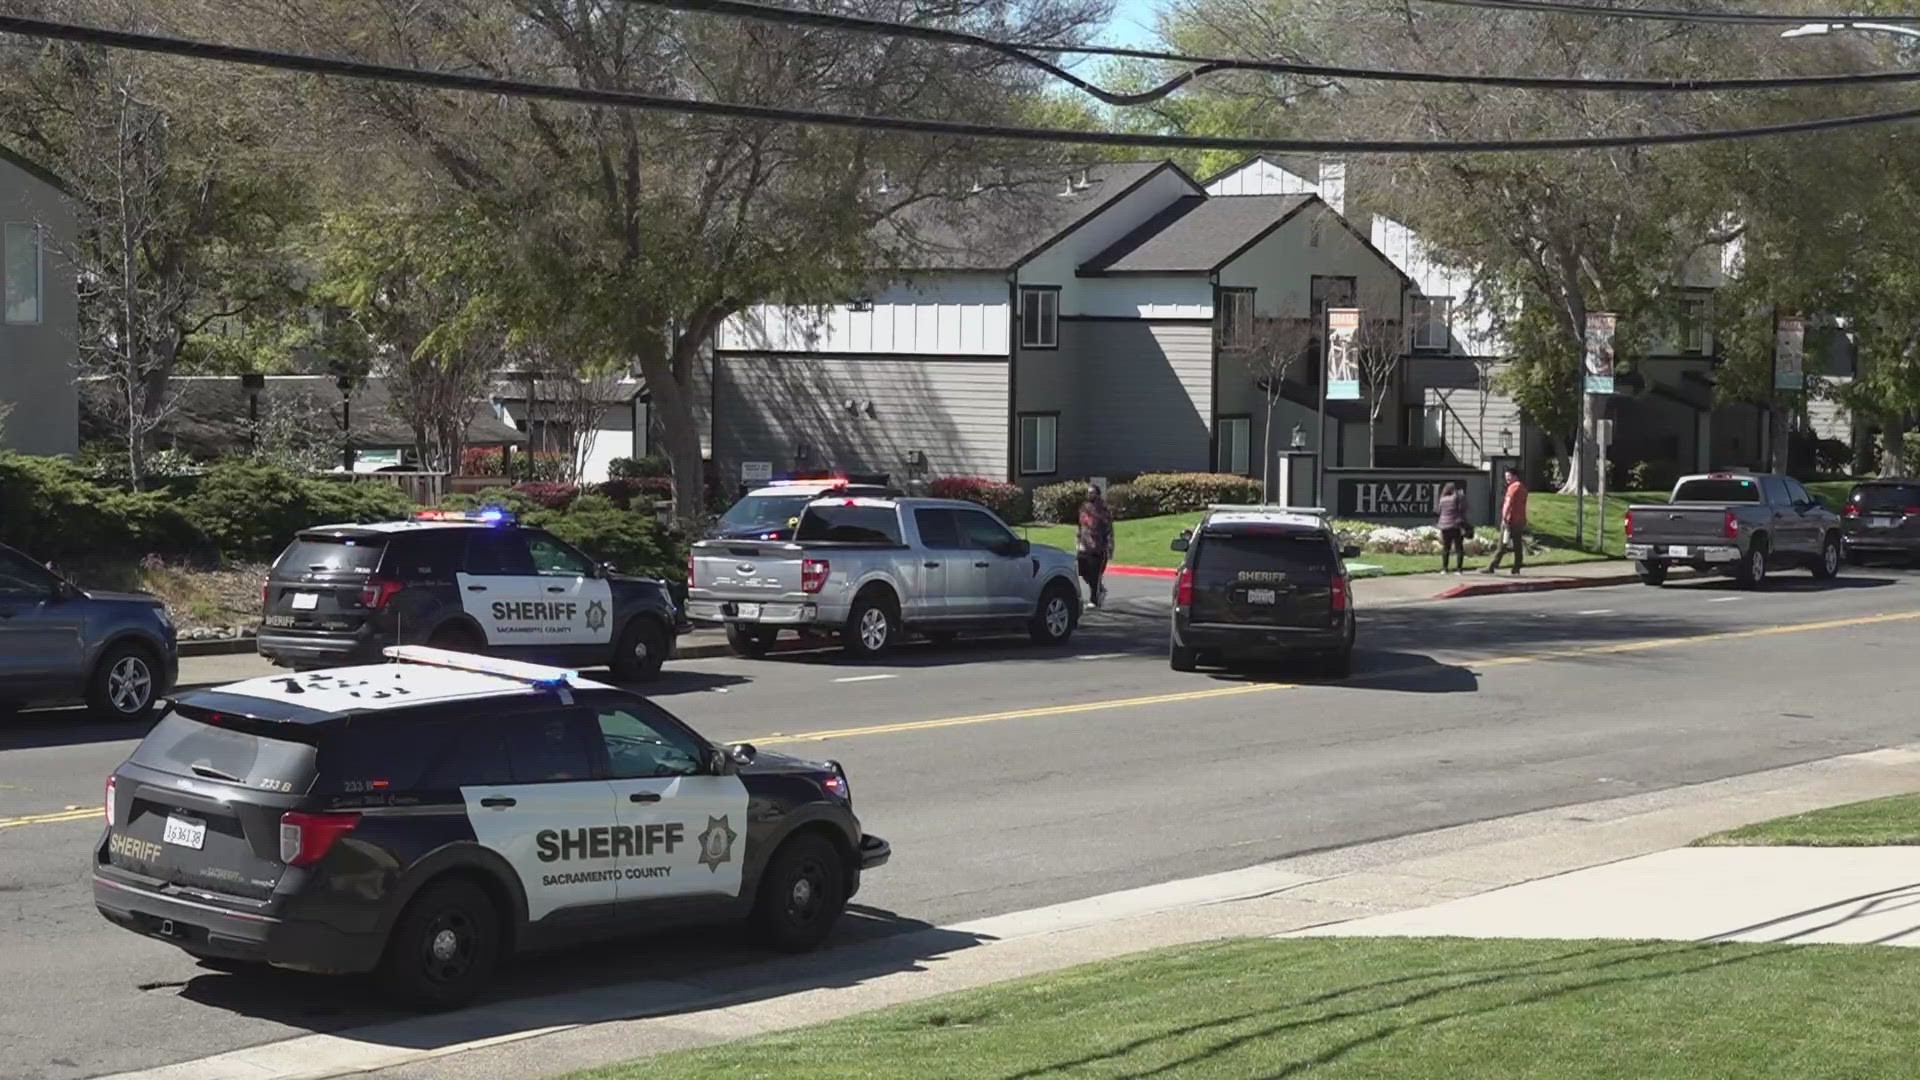 The Sacramento County Sheriff's Office says no deputies were injured after a shootout with a suspect.